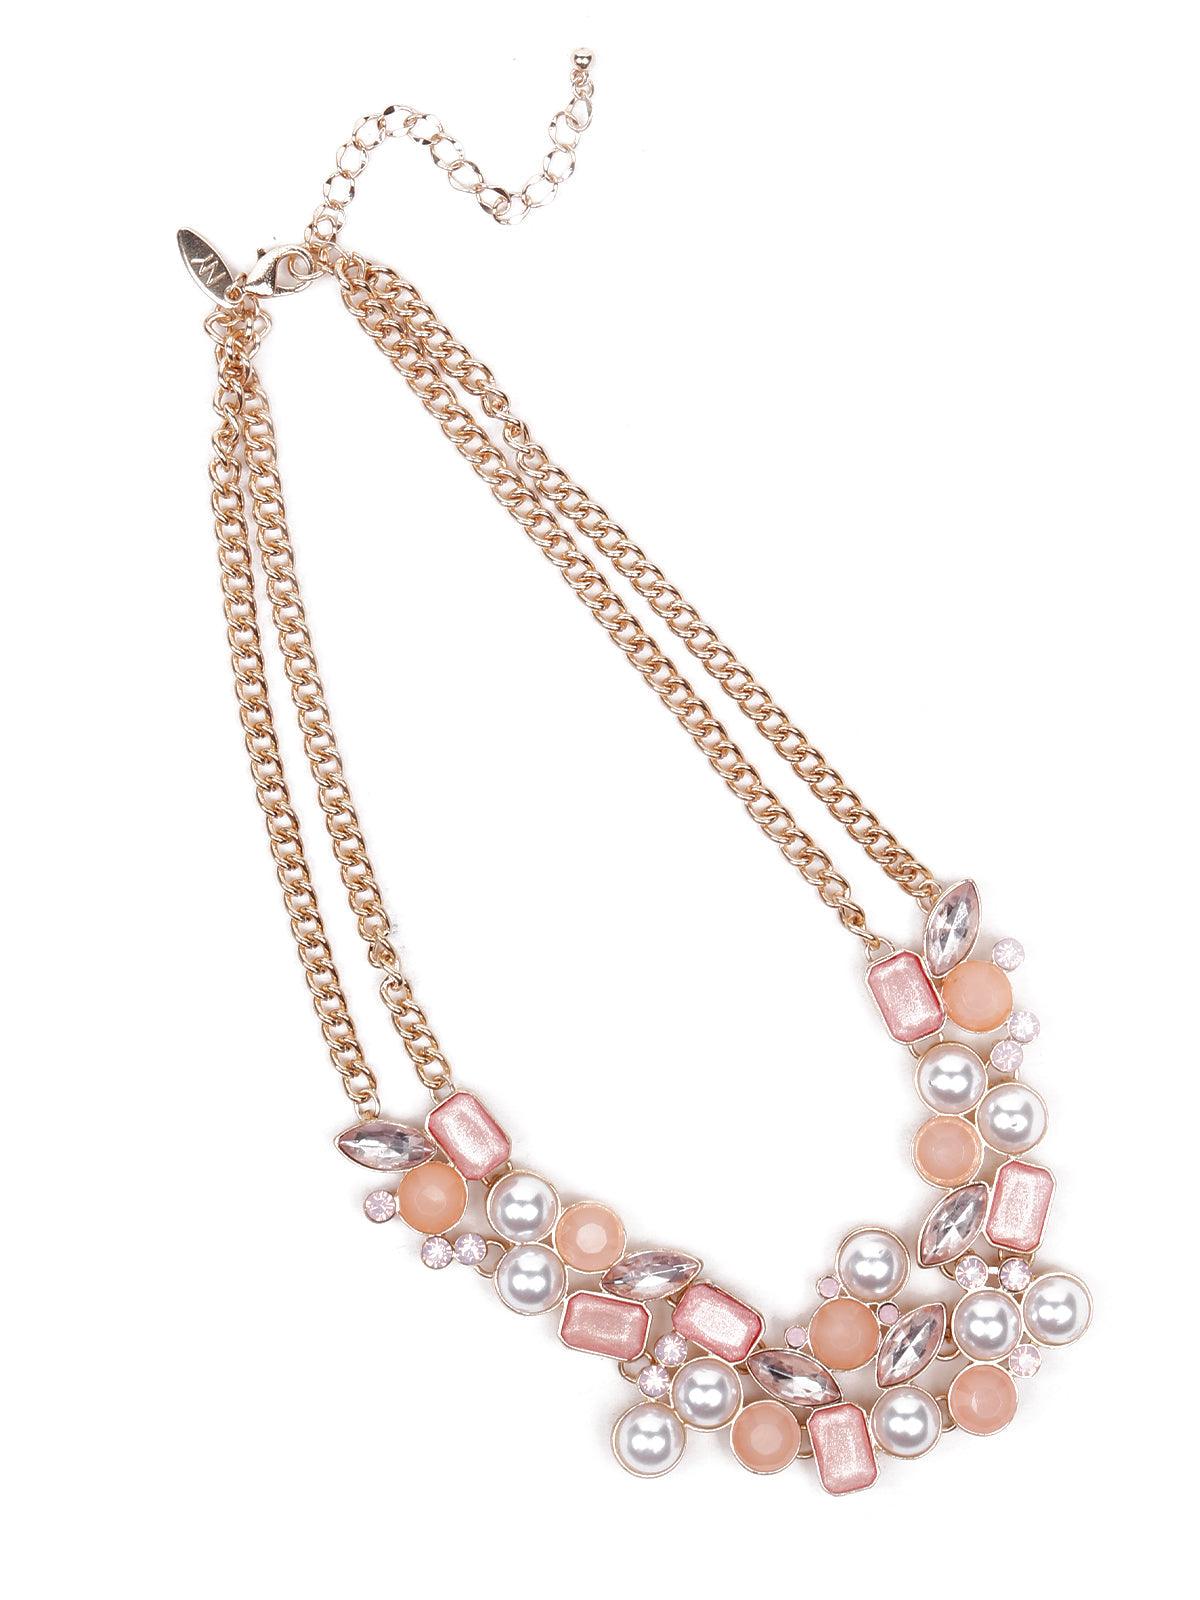 Women's Beads And Pearls Embellished Exquisite Necklace-Peach - Odette